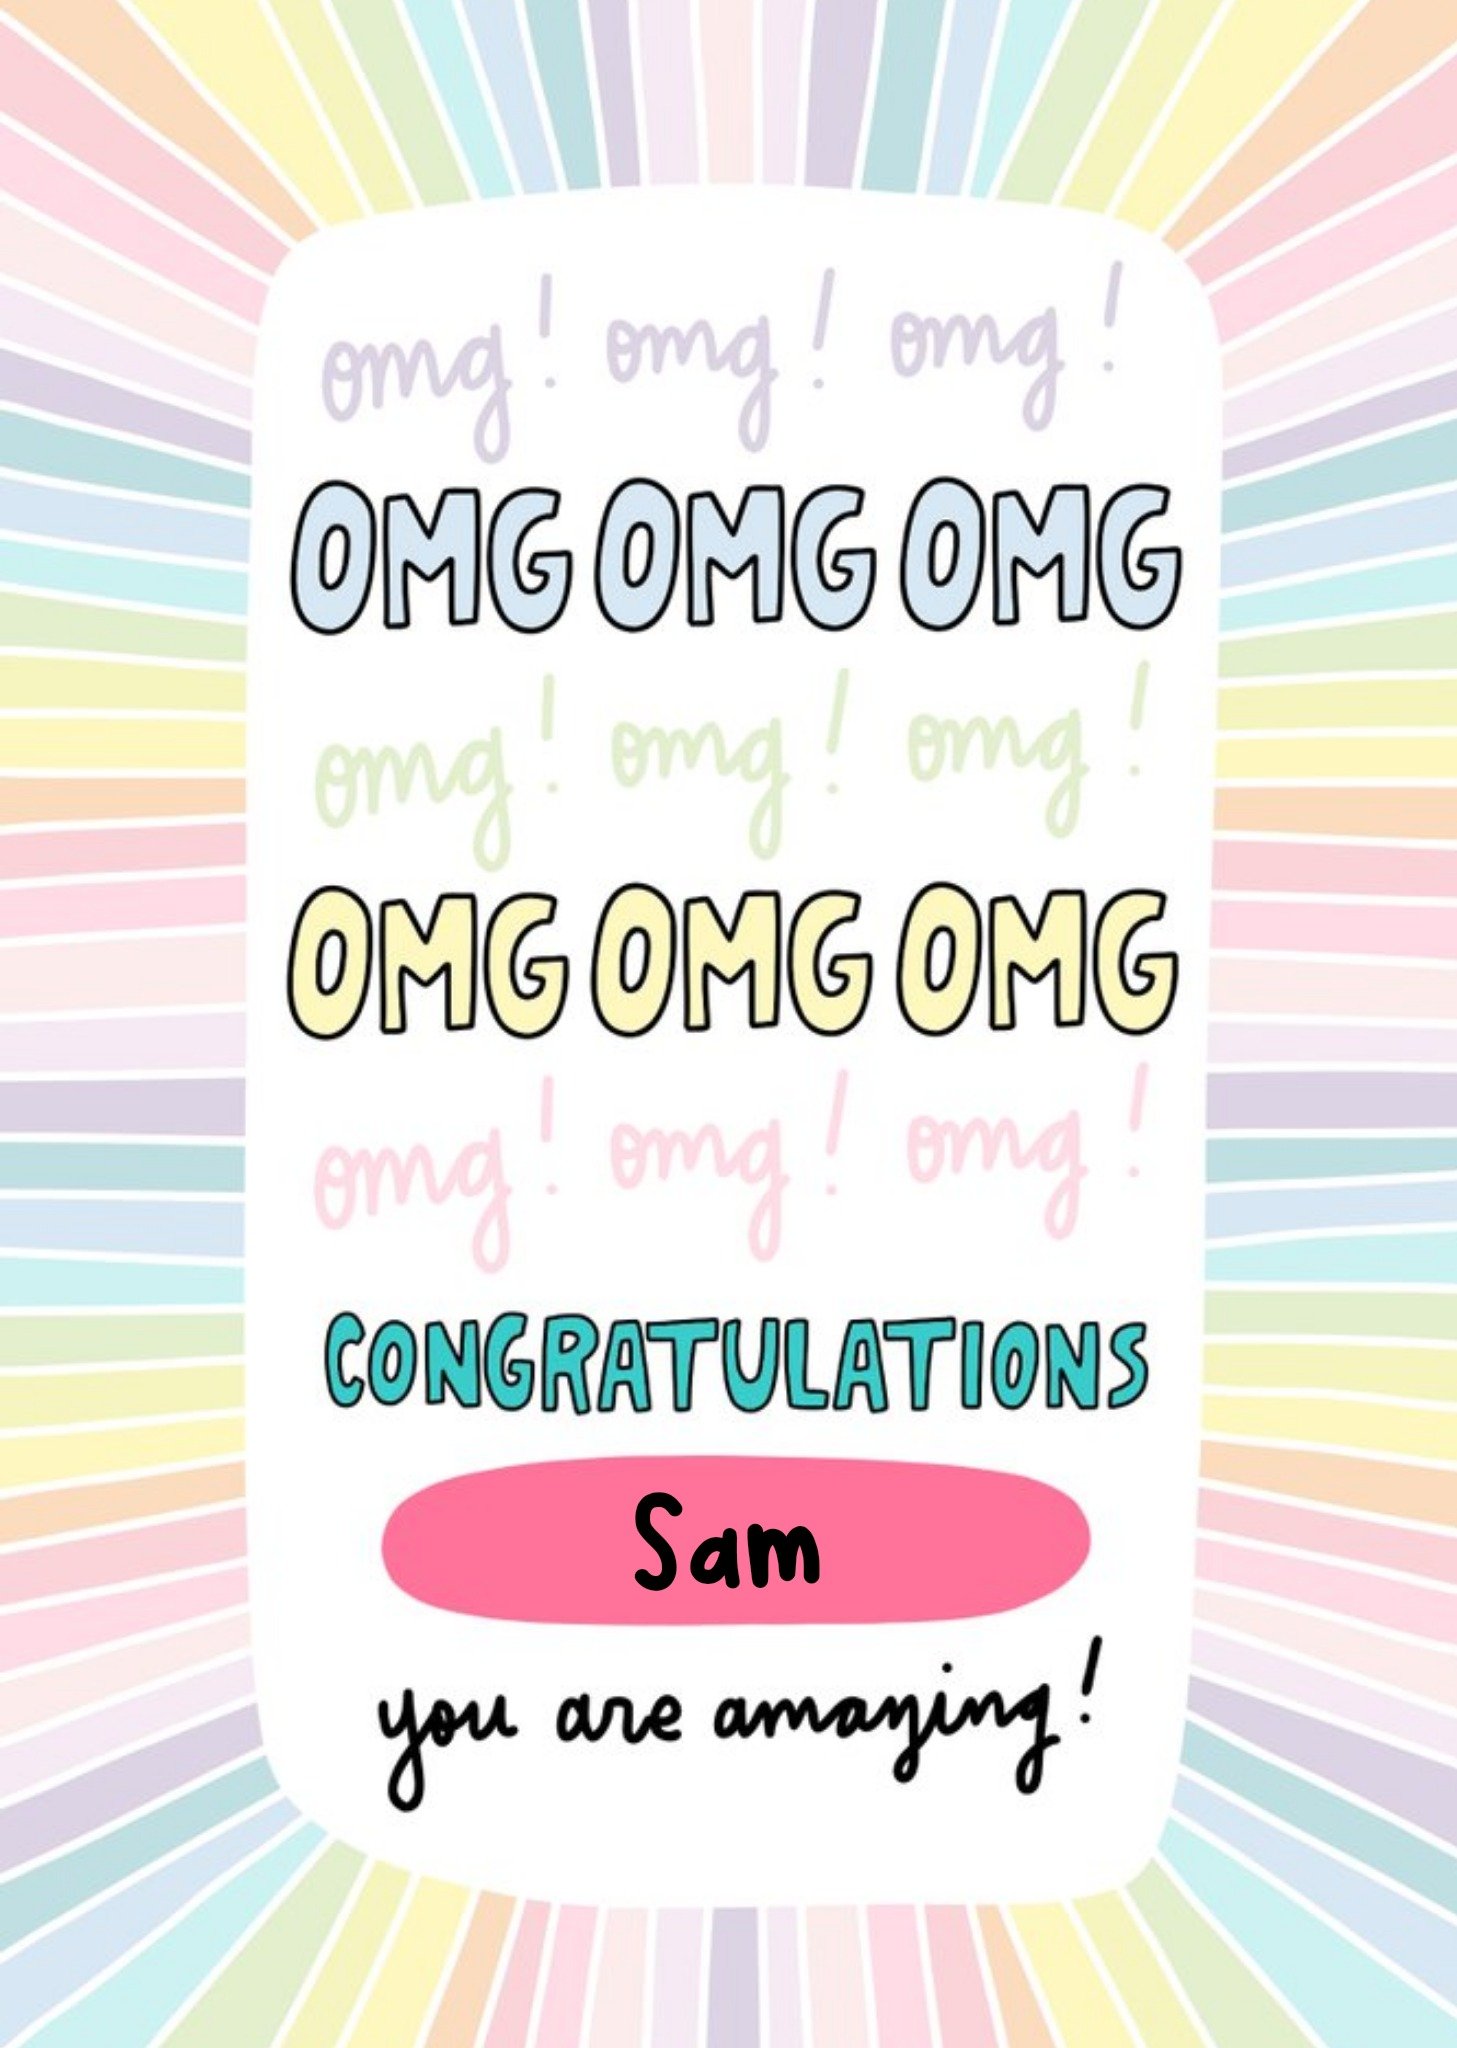 Moonpig Omg Typography With A Rainbow Burst Border Illustration Personalised Congratulations Card, L